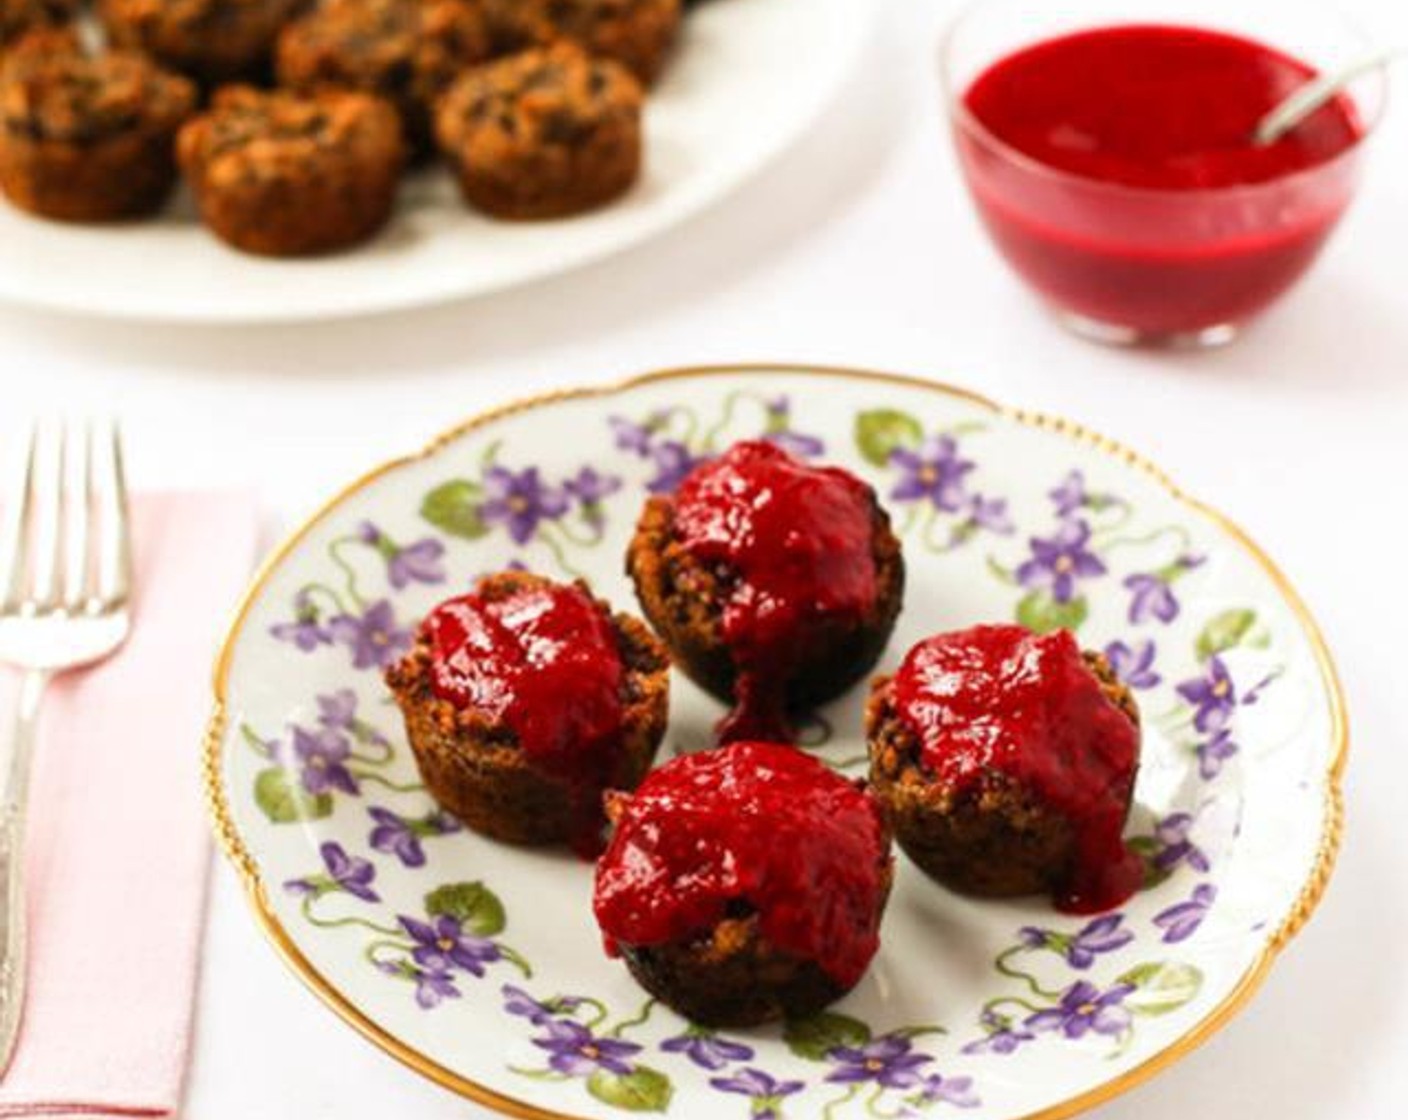 Cranapple Banana Muffins with Raspberry Topping